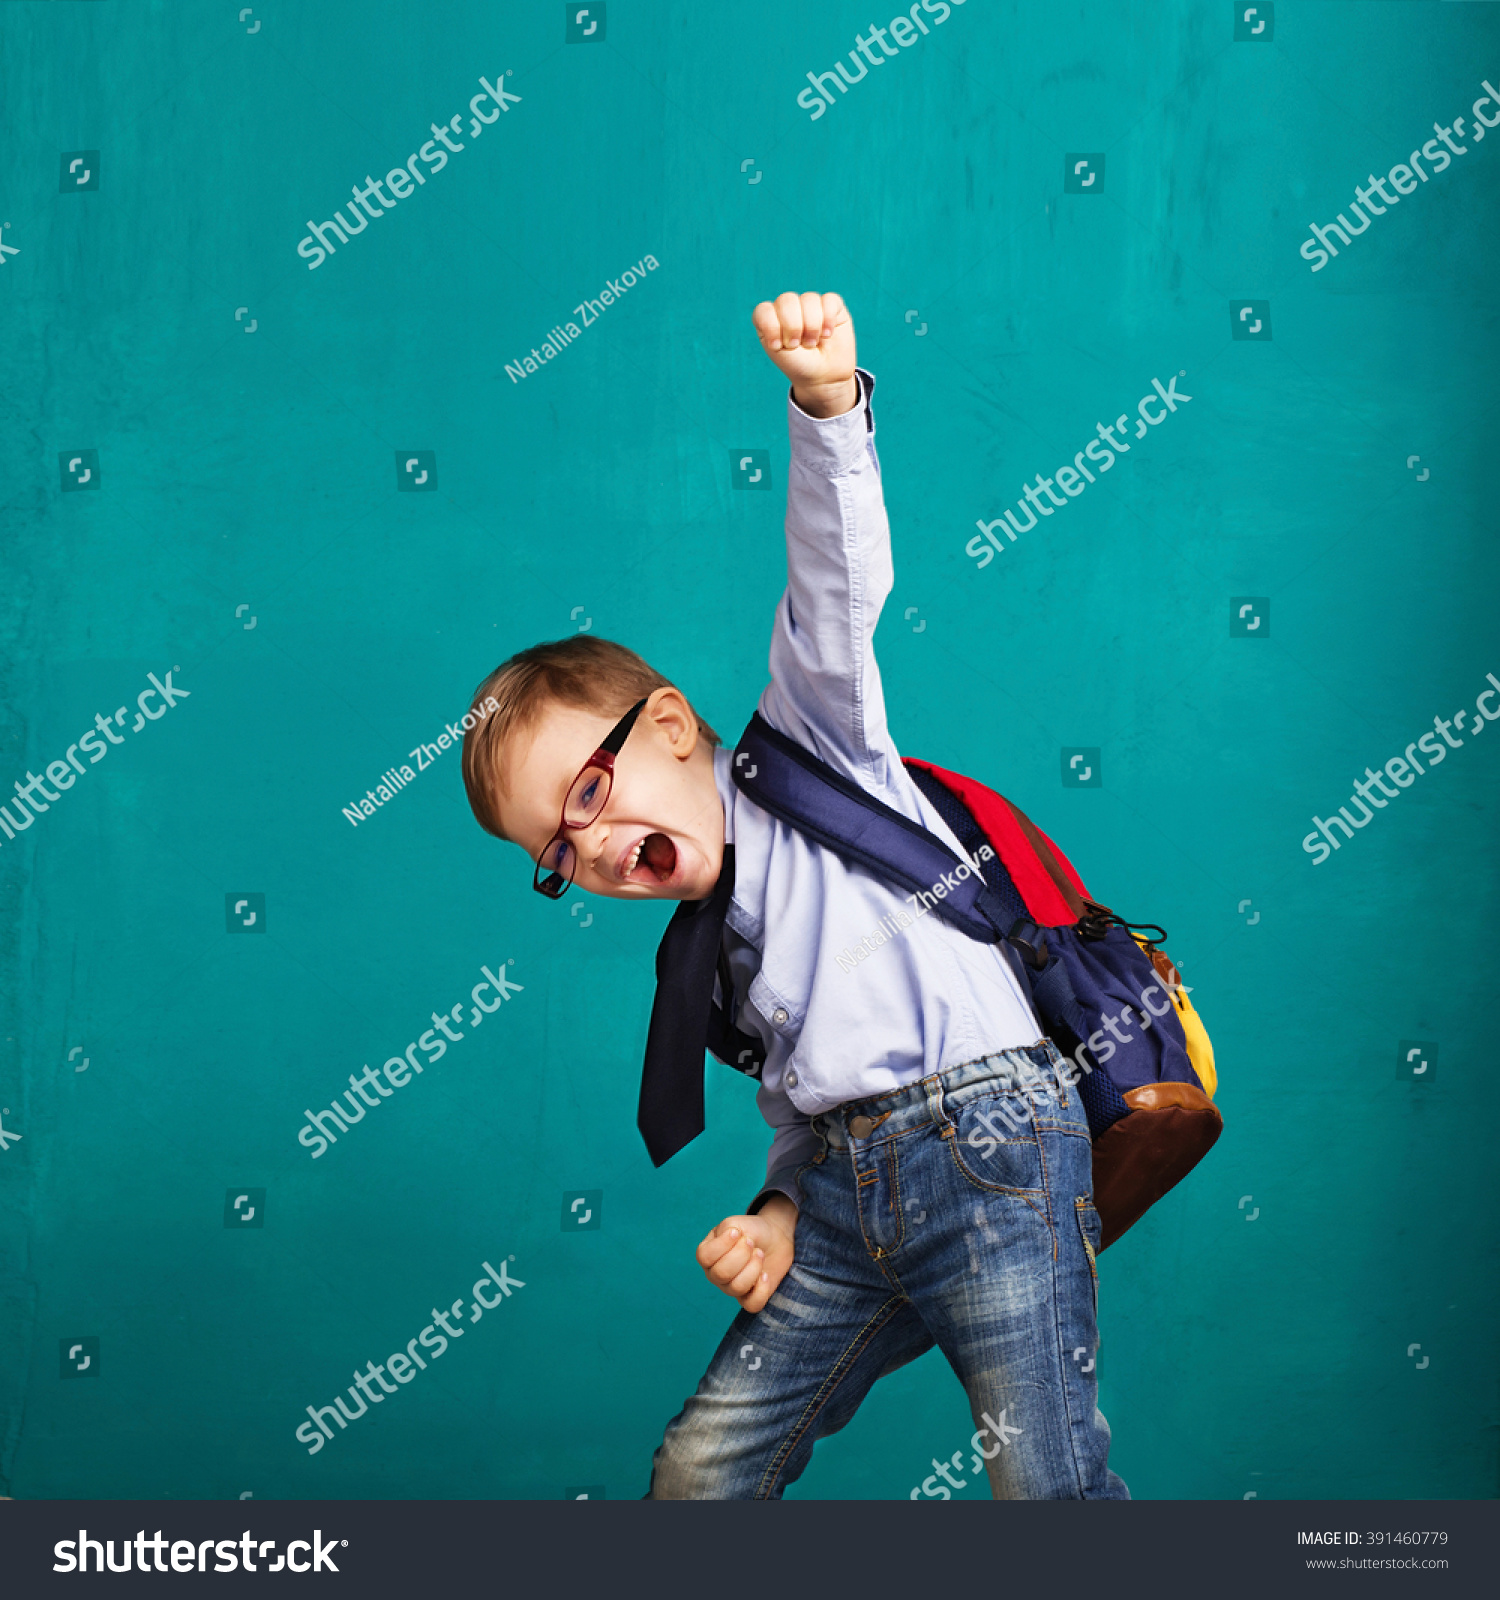 Cheerful smiling little boy with big backpack jumping and having fun against blue wall. Looking at camera. School concept. Back to School #391460779